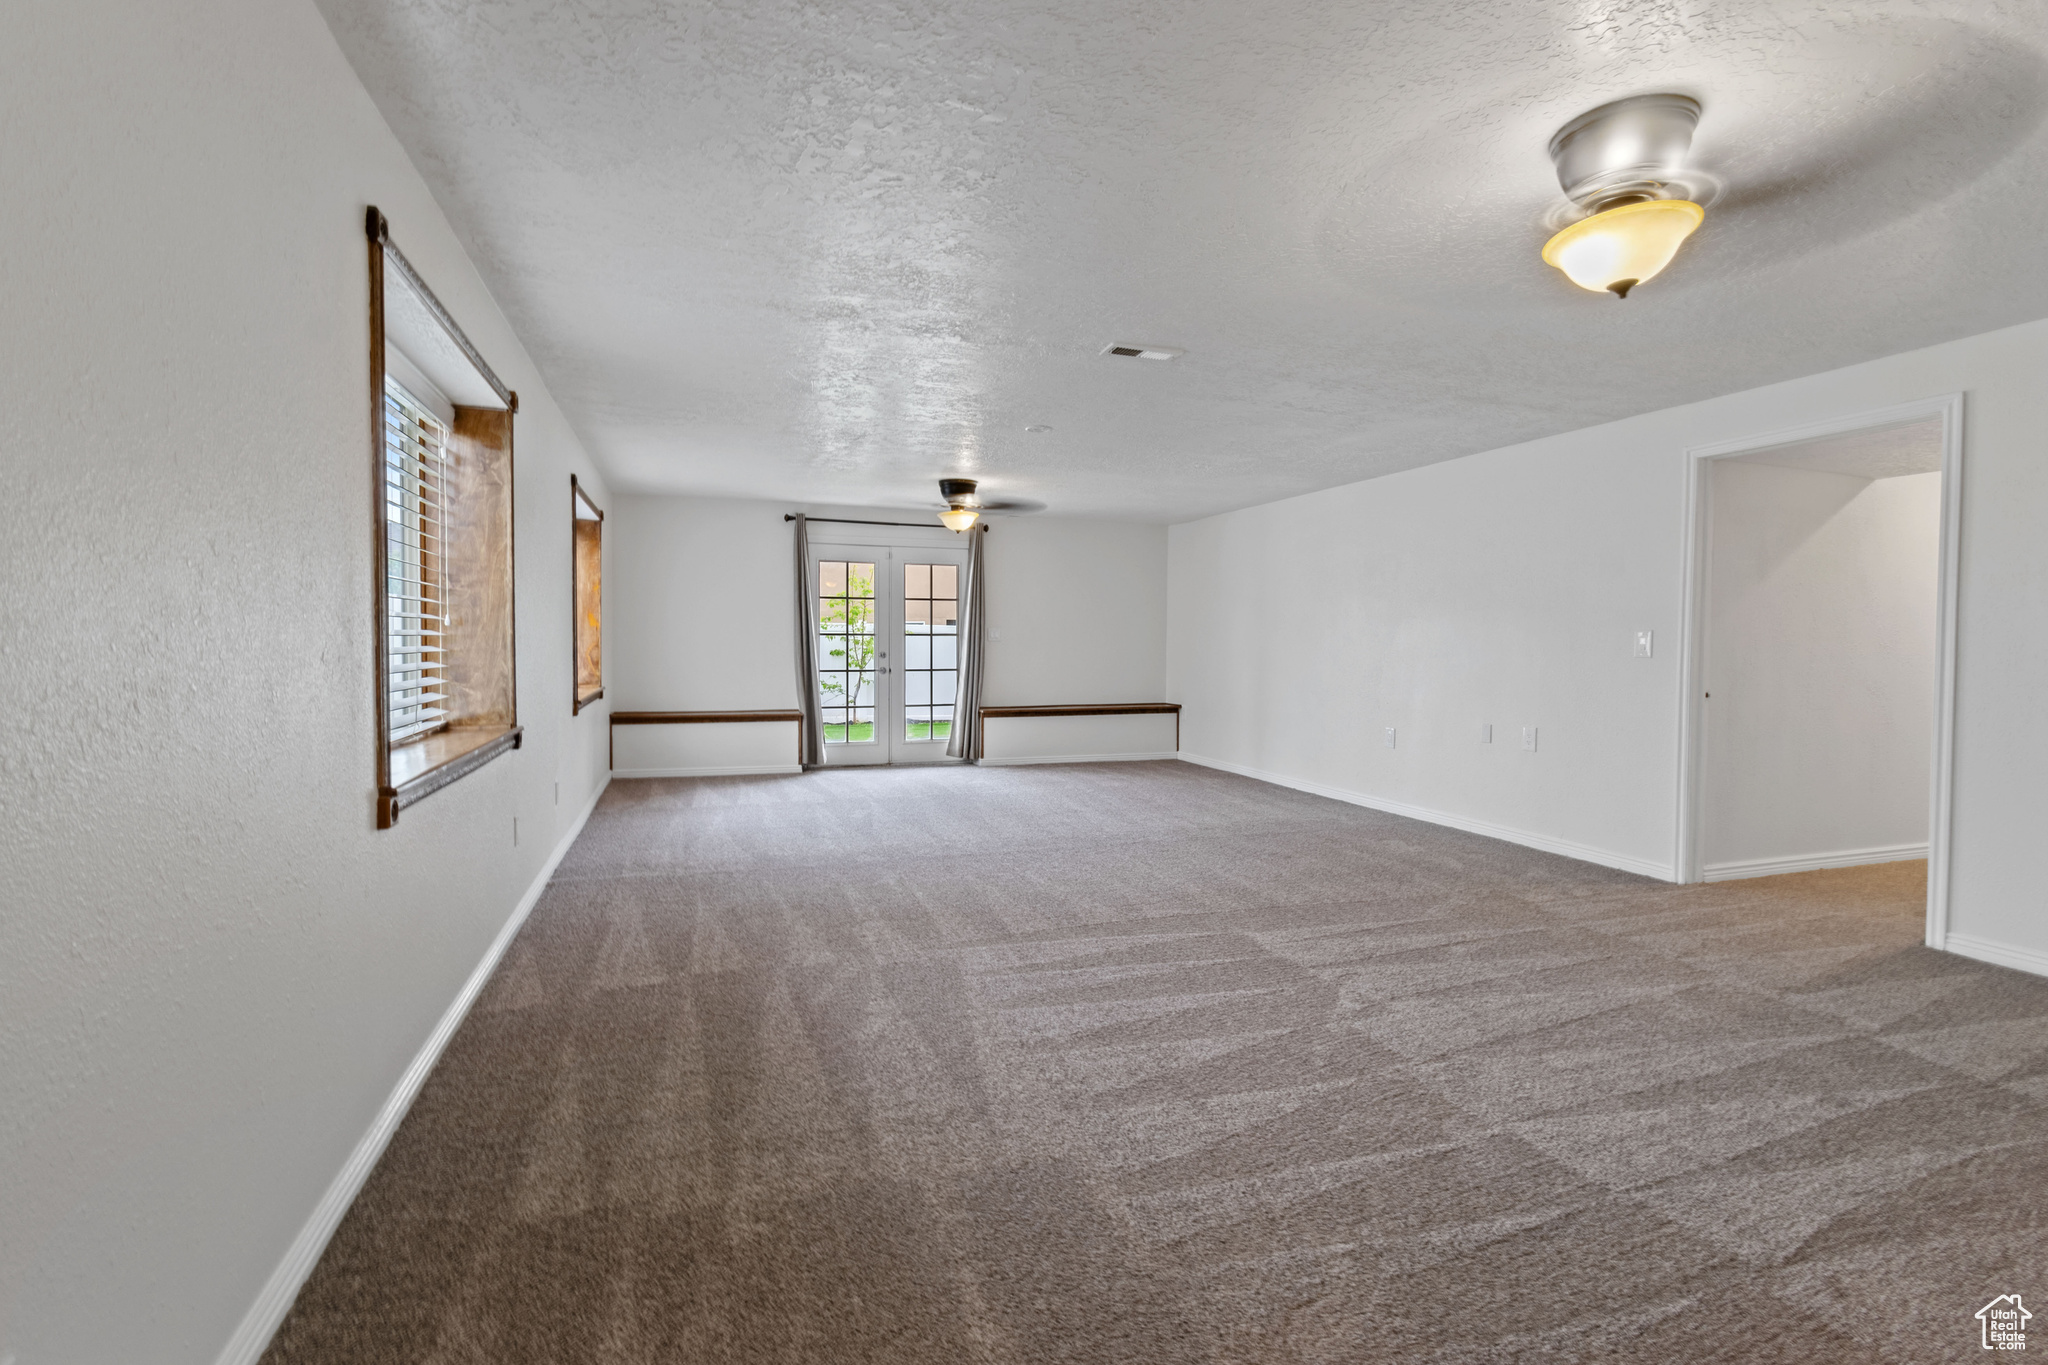 Empty room featuring a textured ceiling, carpet floors, and ceiling fan